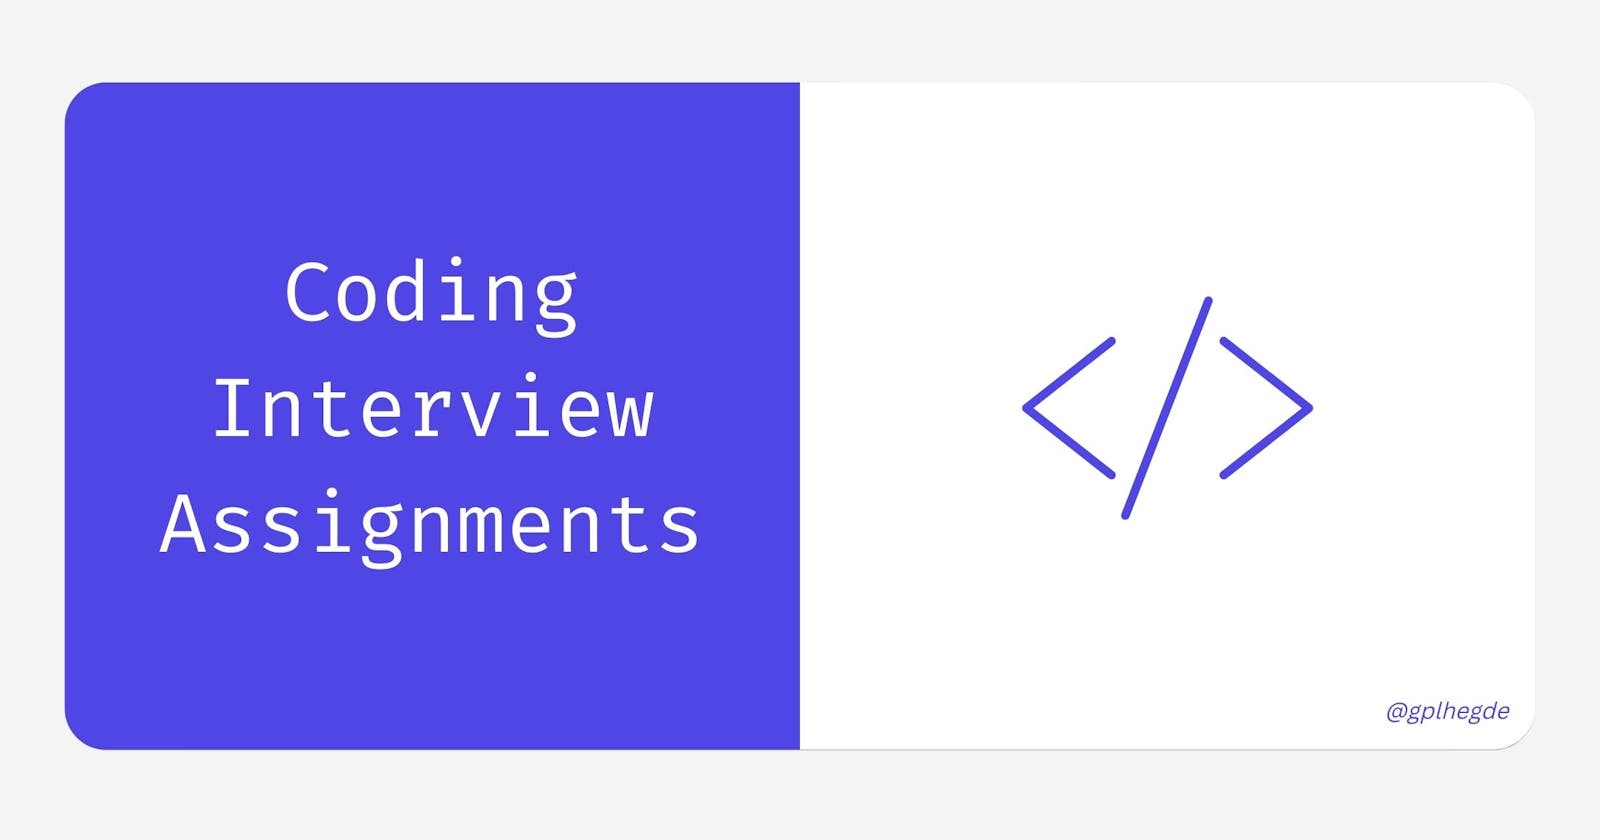 Tips on approaching coding interview assignments